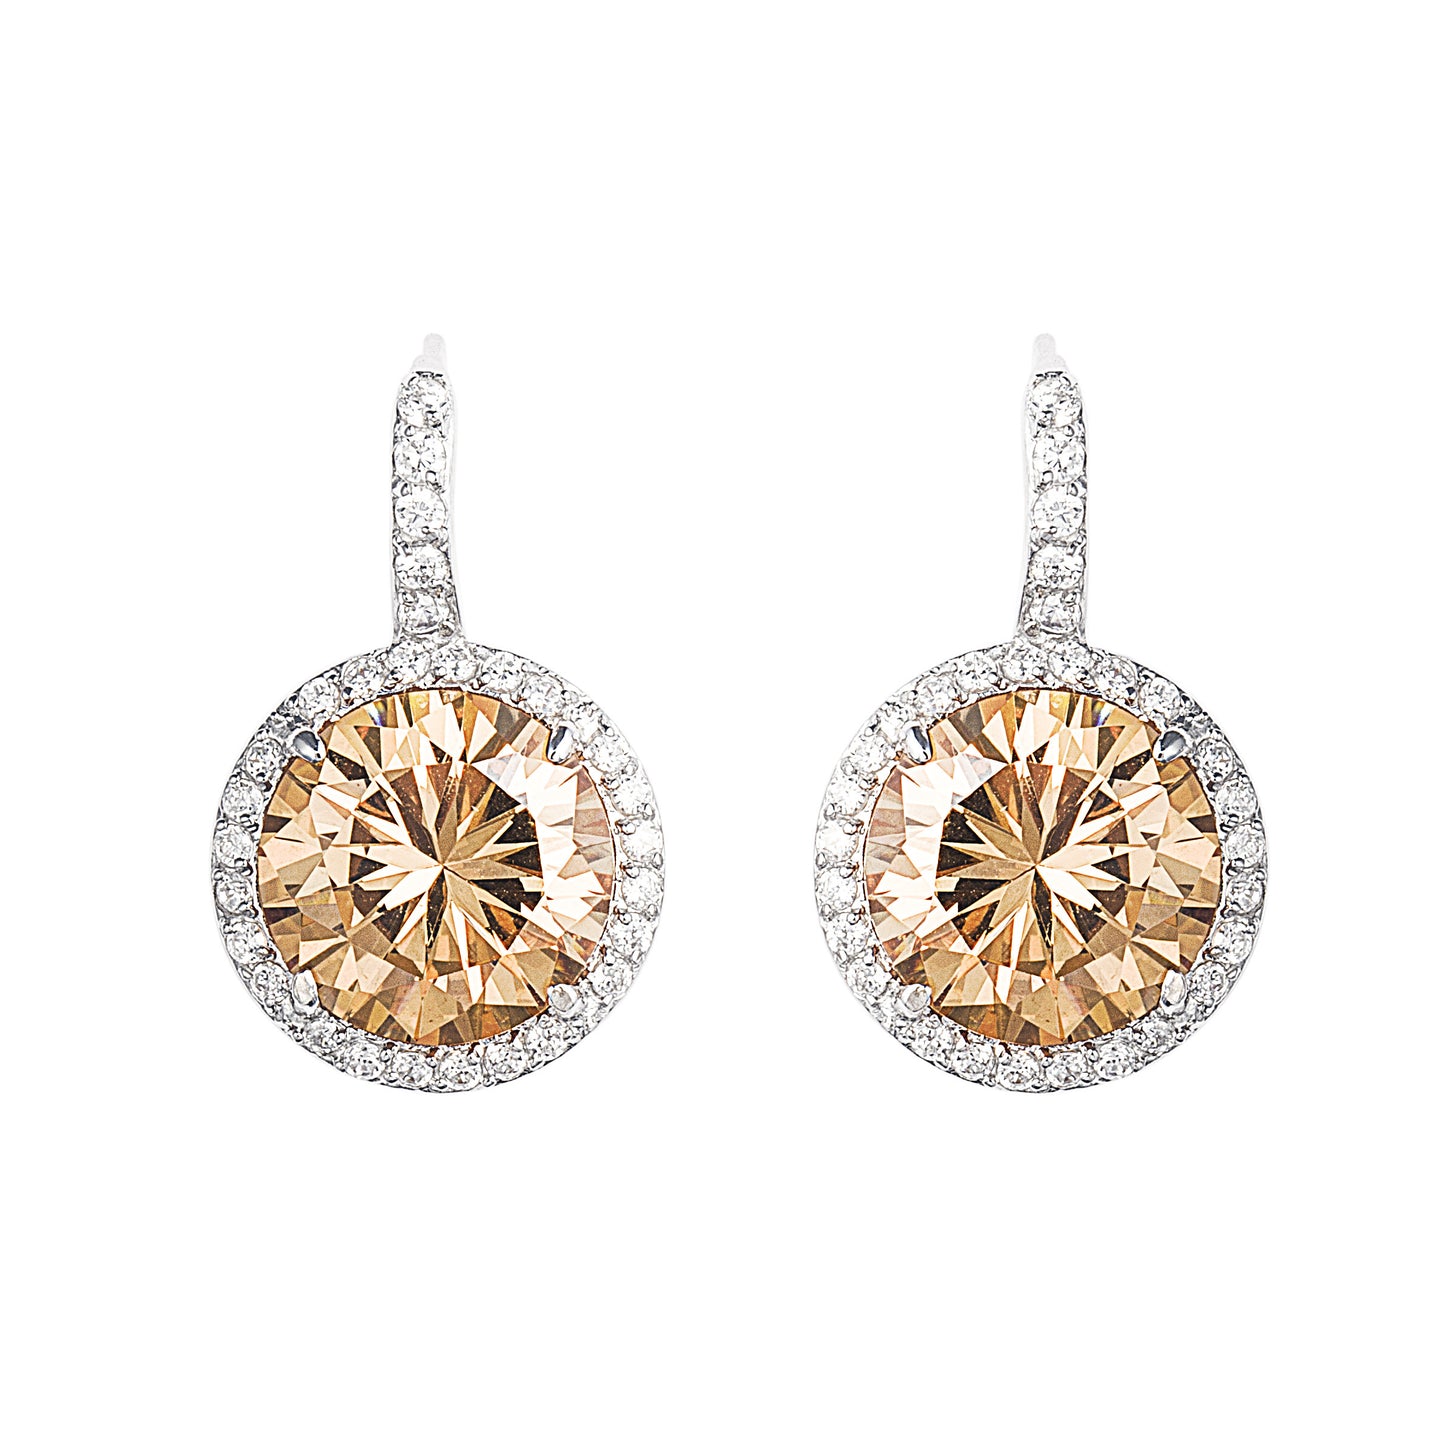 Hanging 925 Sterling Silver earrings featuring a Large Regal Champagne Stone and antique closing mechanism.